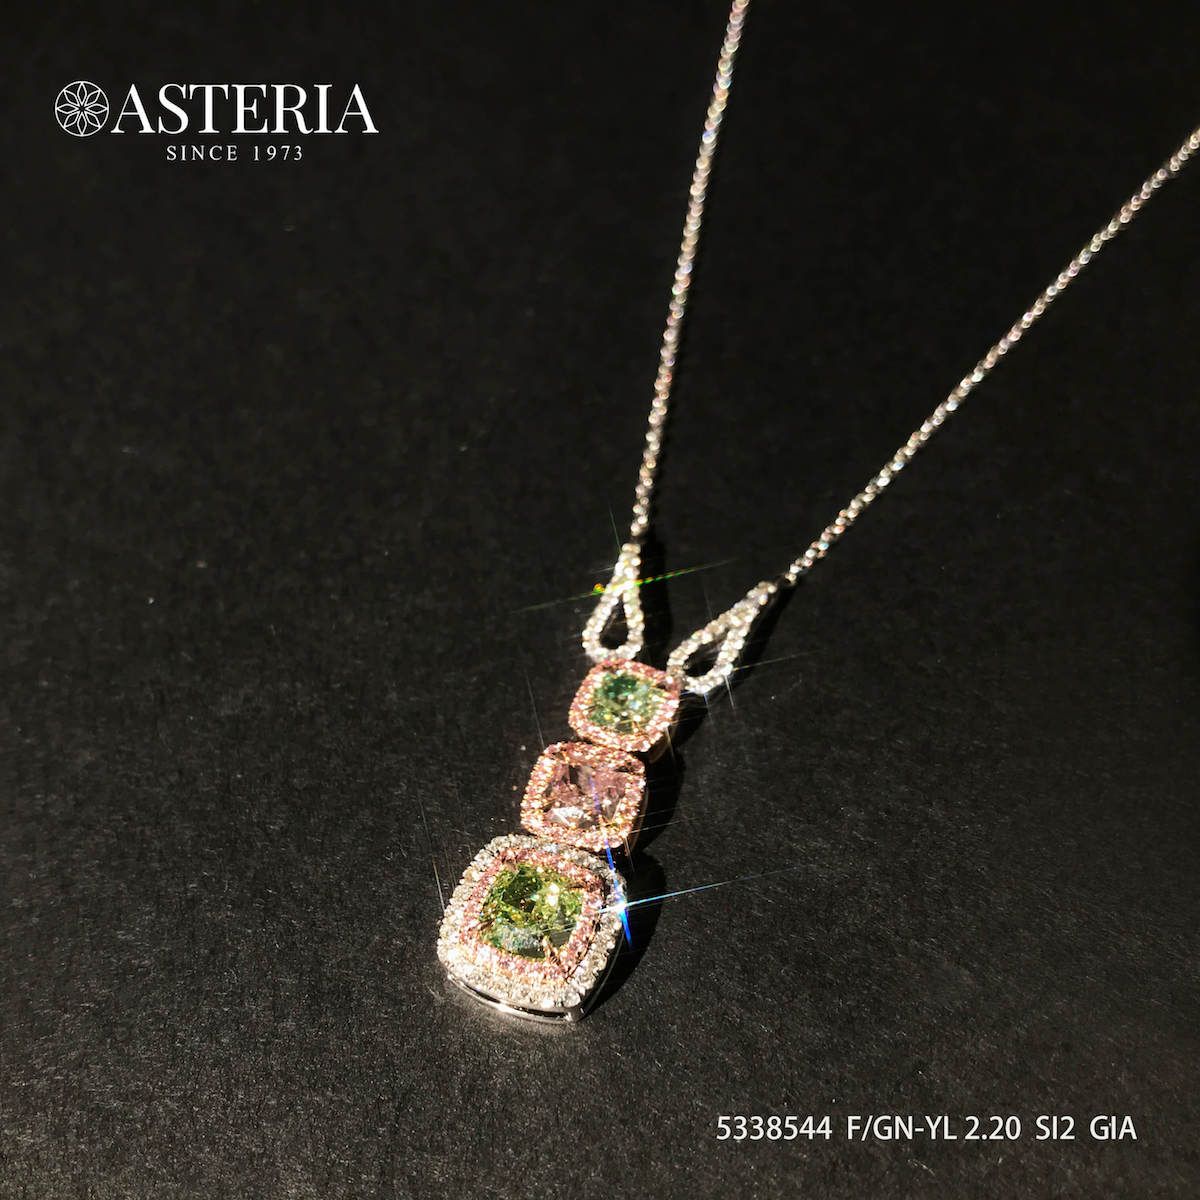 Fancy Light Yellow Green Diamond Necklace, 2.20 Ct. (2.72 Ct. TW), Cushion shape, GIA Certified, JCNF05338544